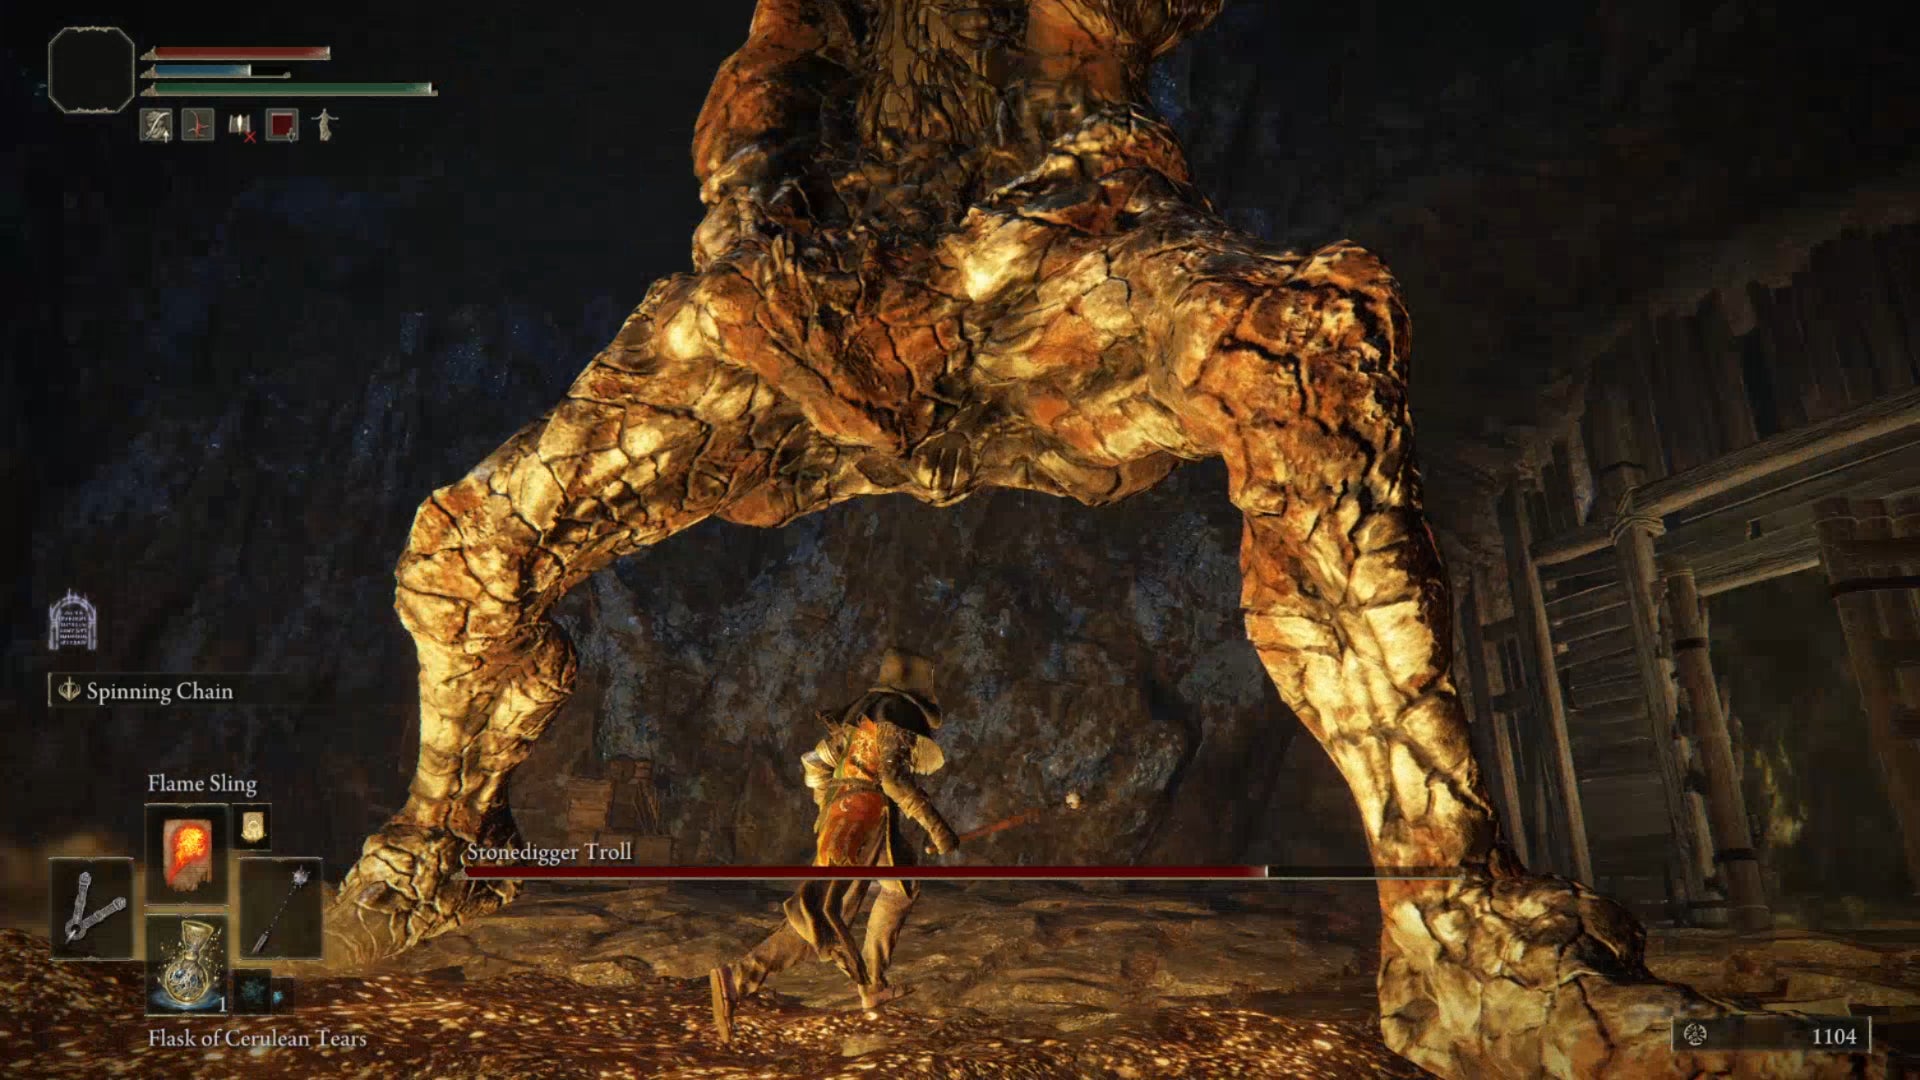 A close-up of the player in Elden Ring slipping between the legs of the Stonedigger Troll boss.